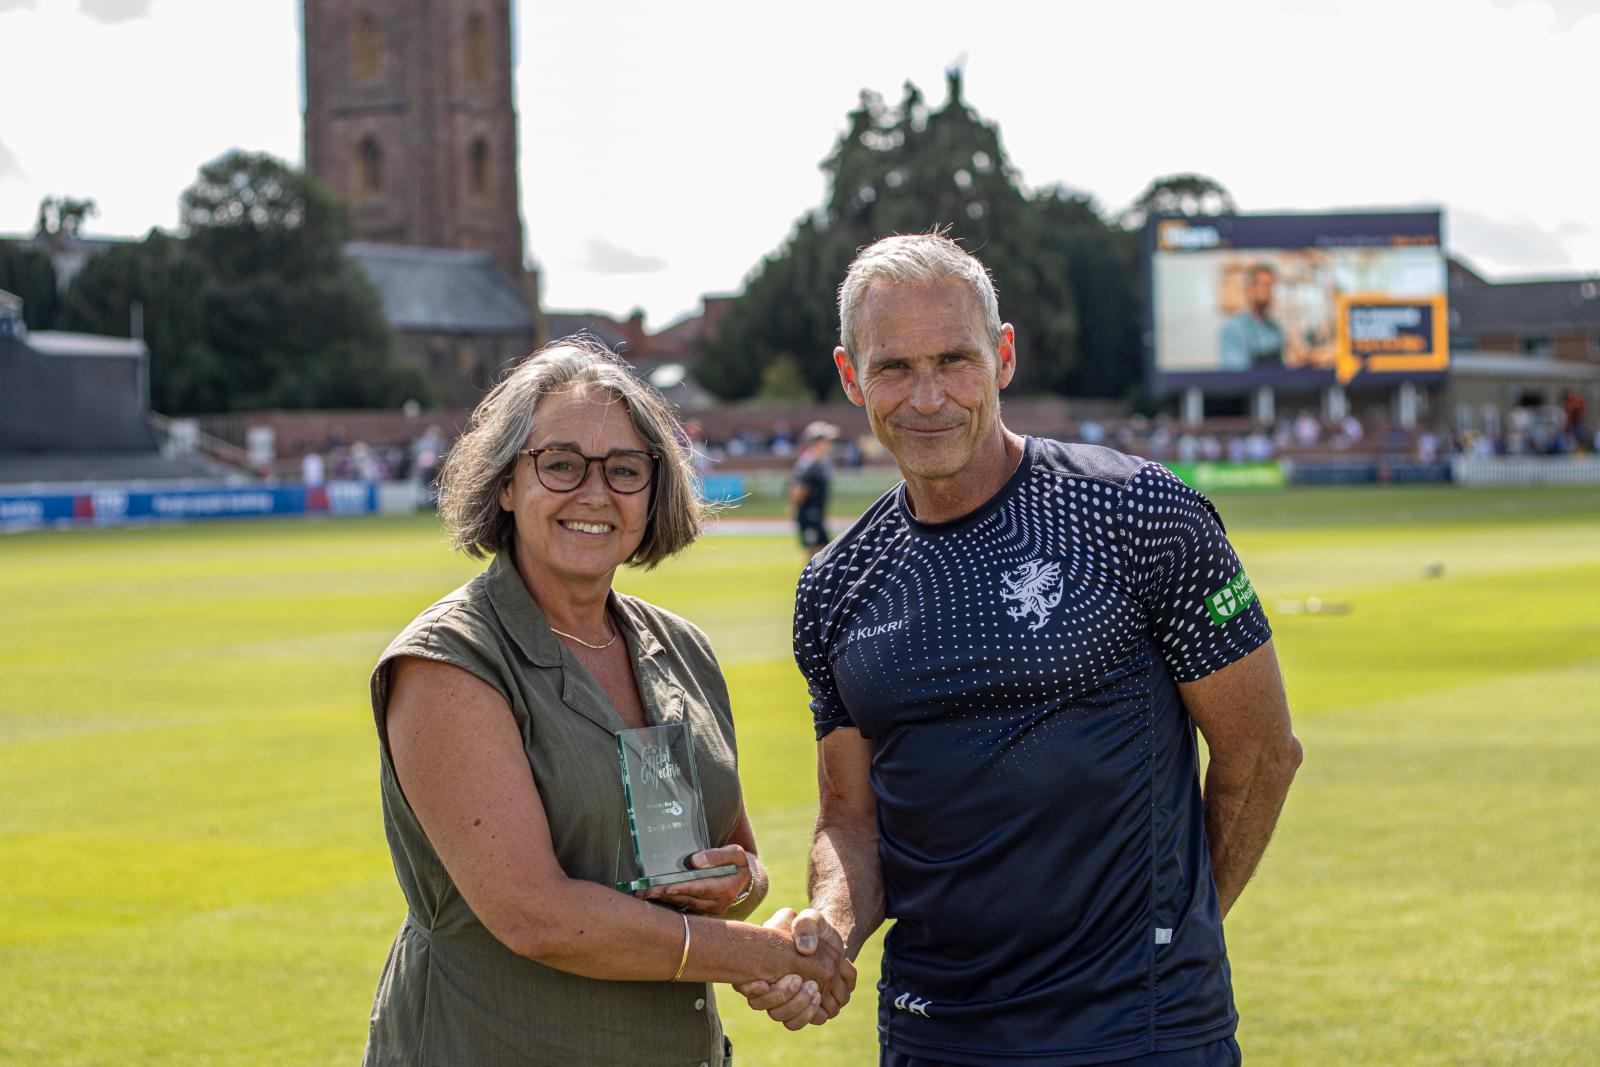 Caroline Wilson receives her award at the Cooper Associates County Ground.